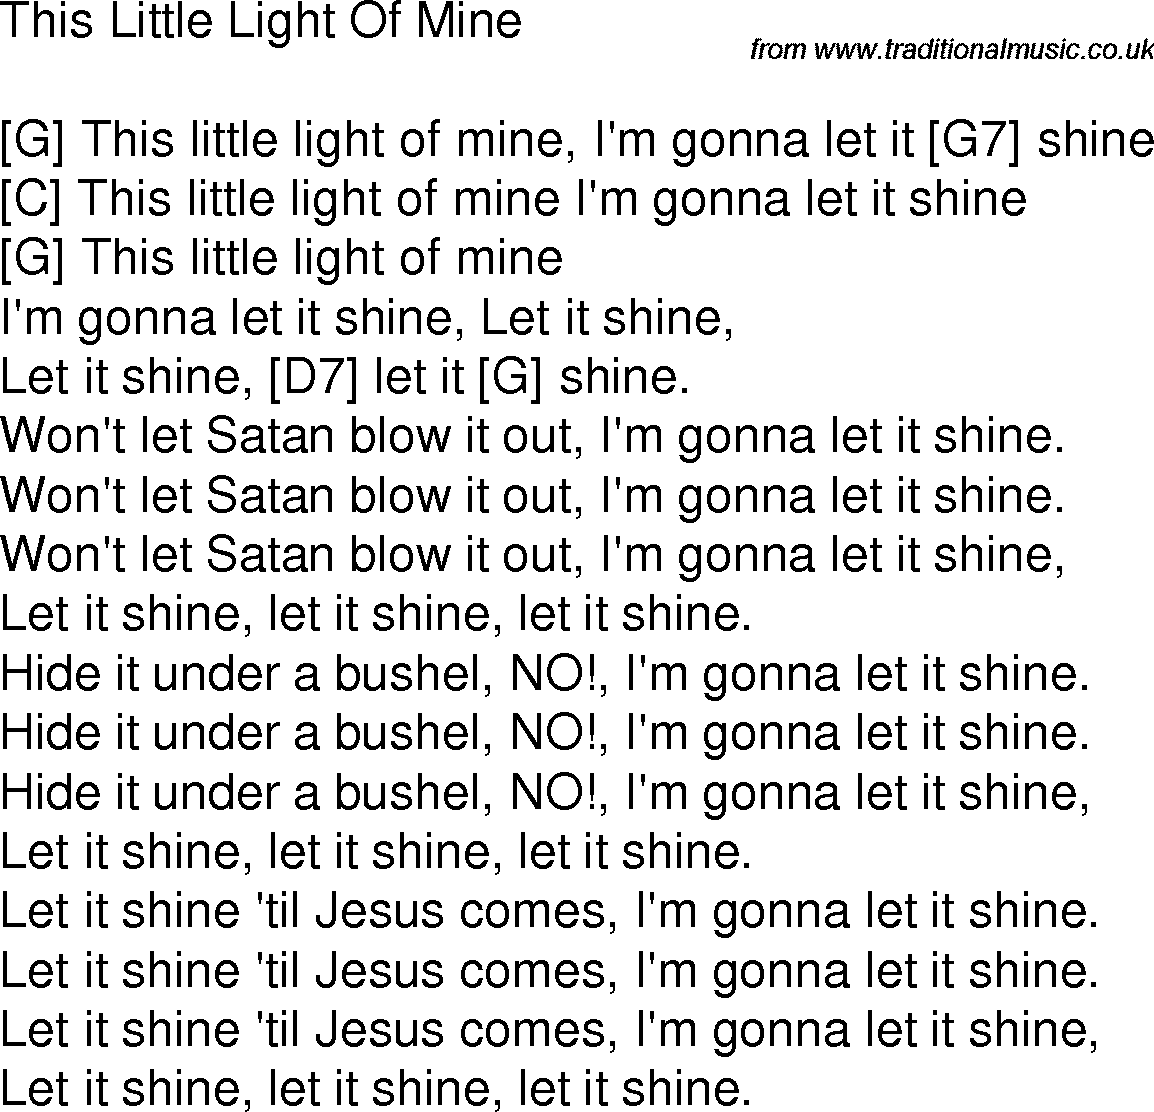 Old time song lyrics with chords for This Little Light Of Mine G